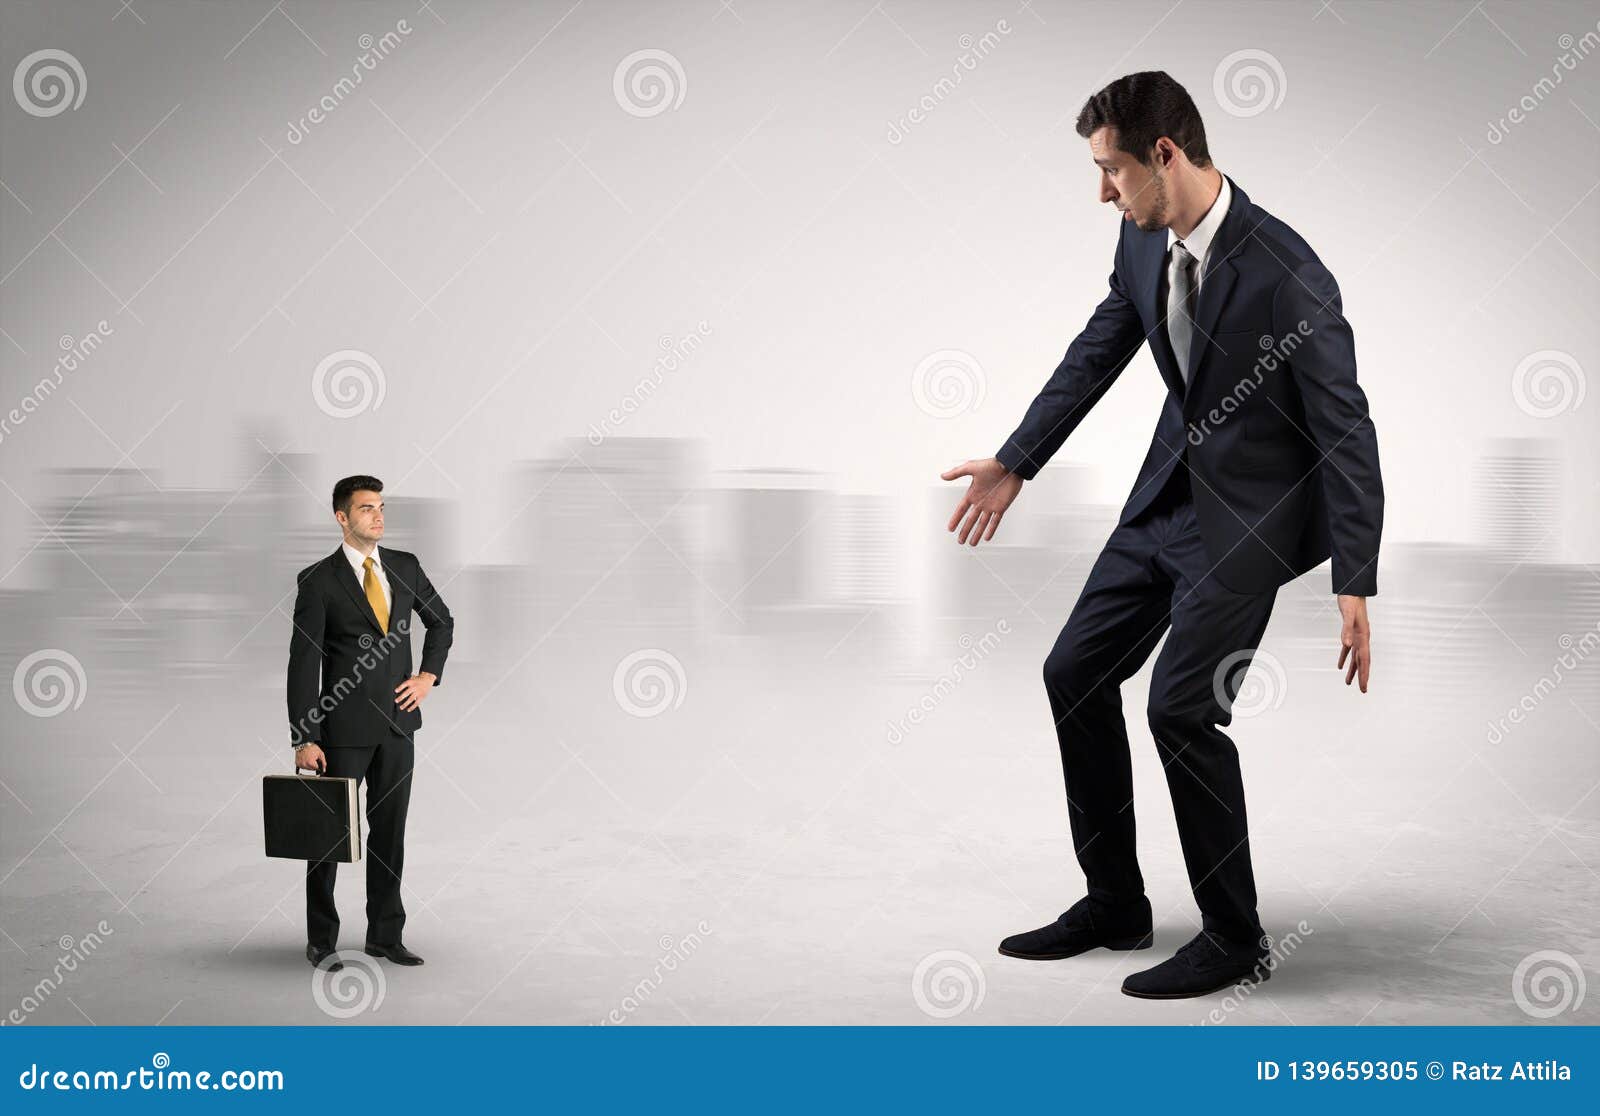 Giant Businessman is Afraid of Small Executor Stock Image - Image of ...